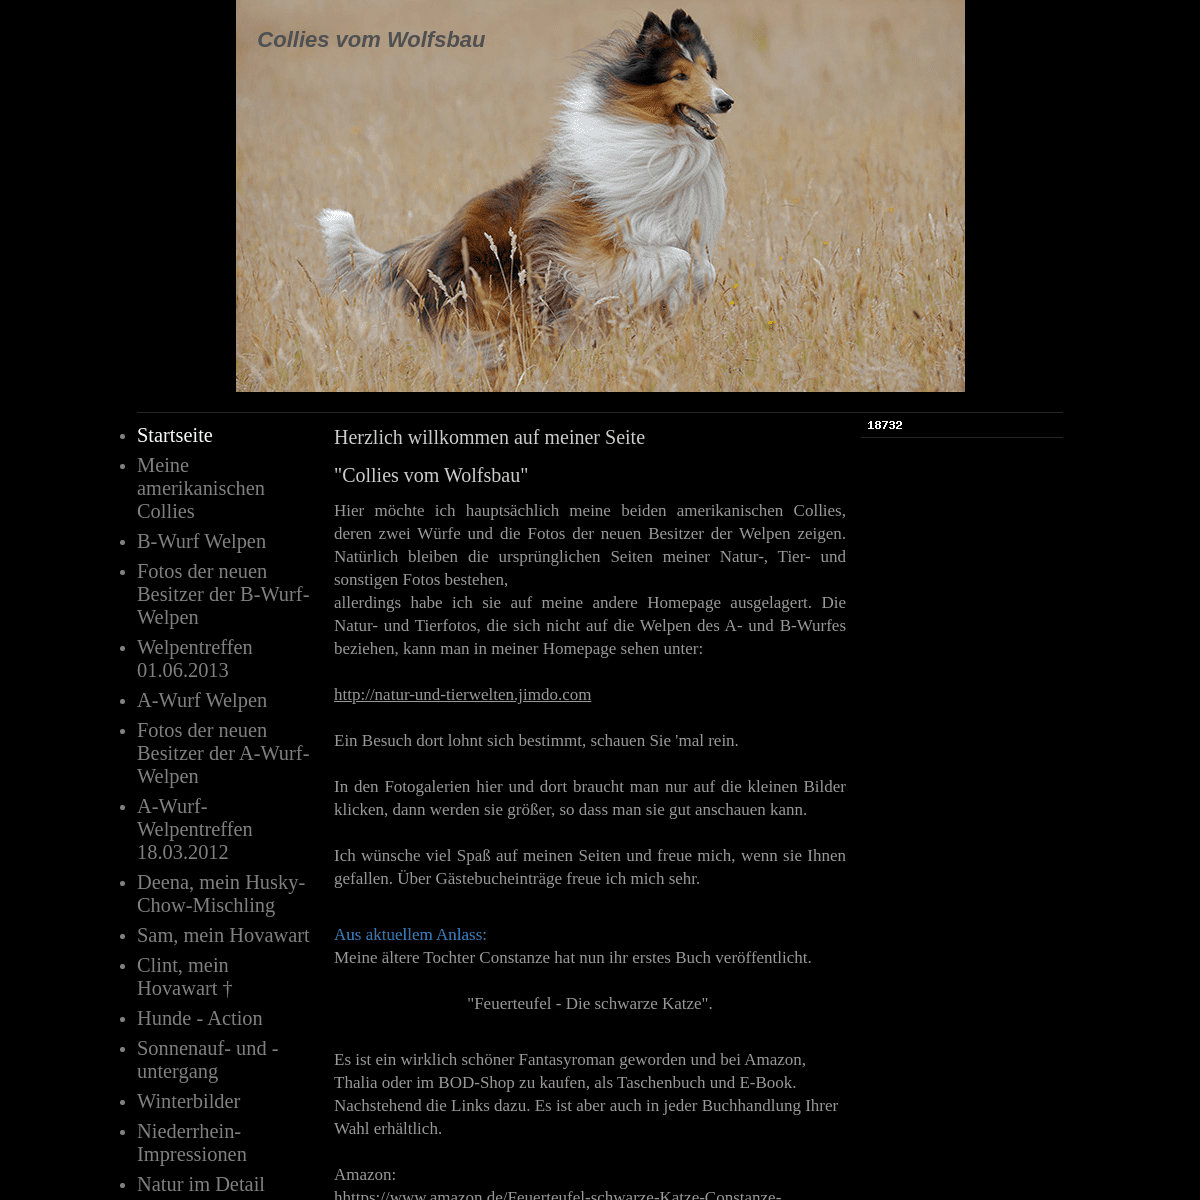 A complete backup of collies-vom-wolfsbau.jimdo.com